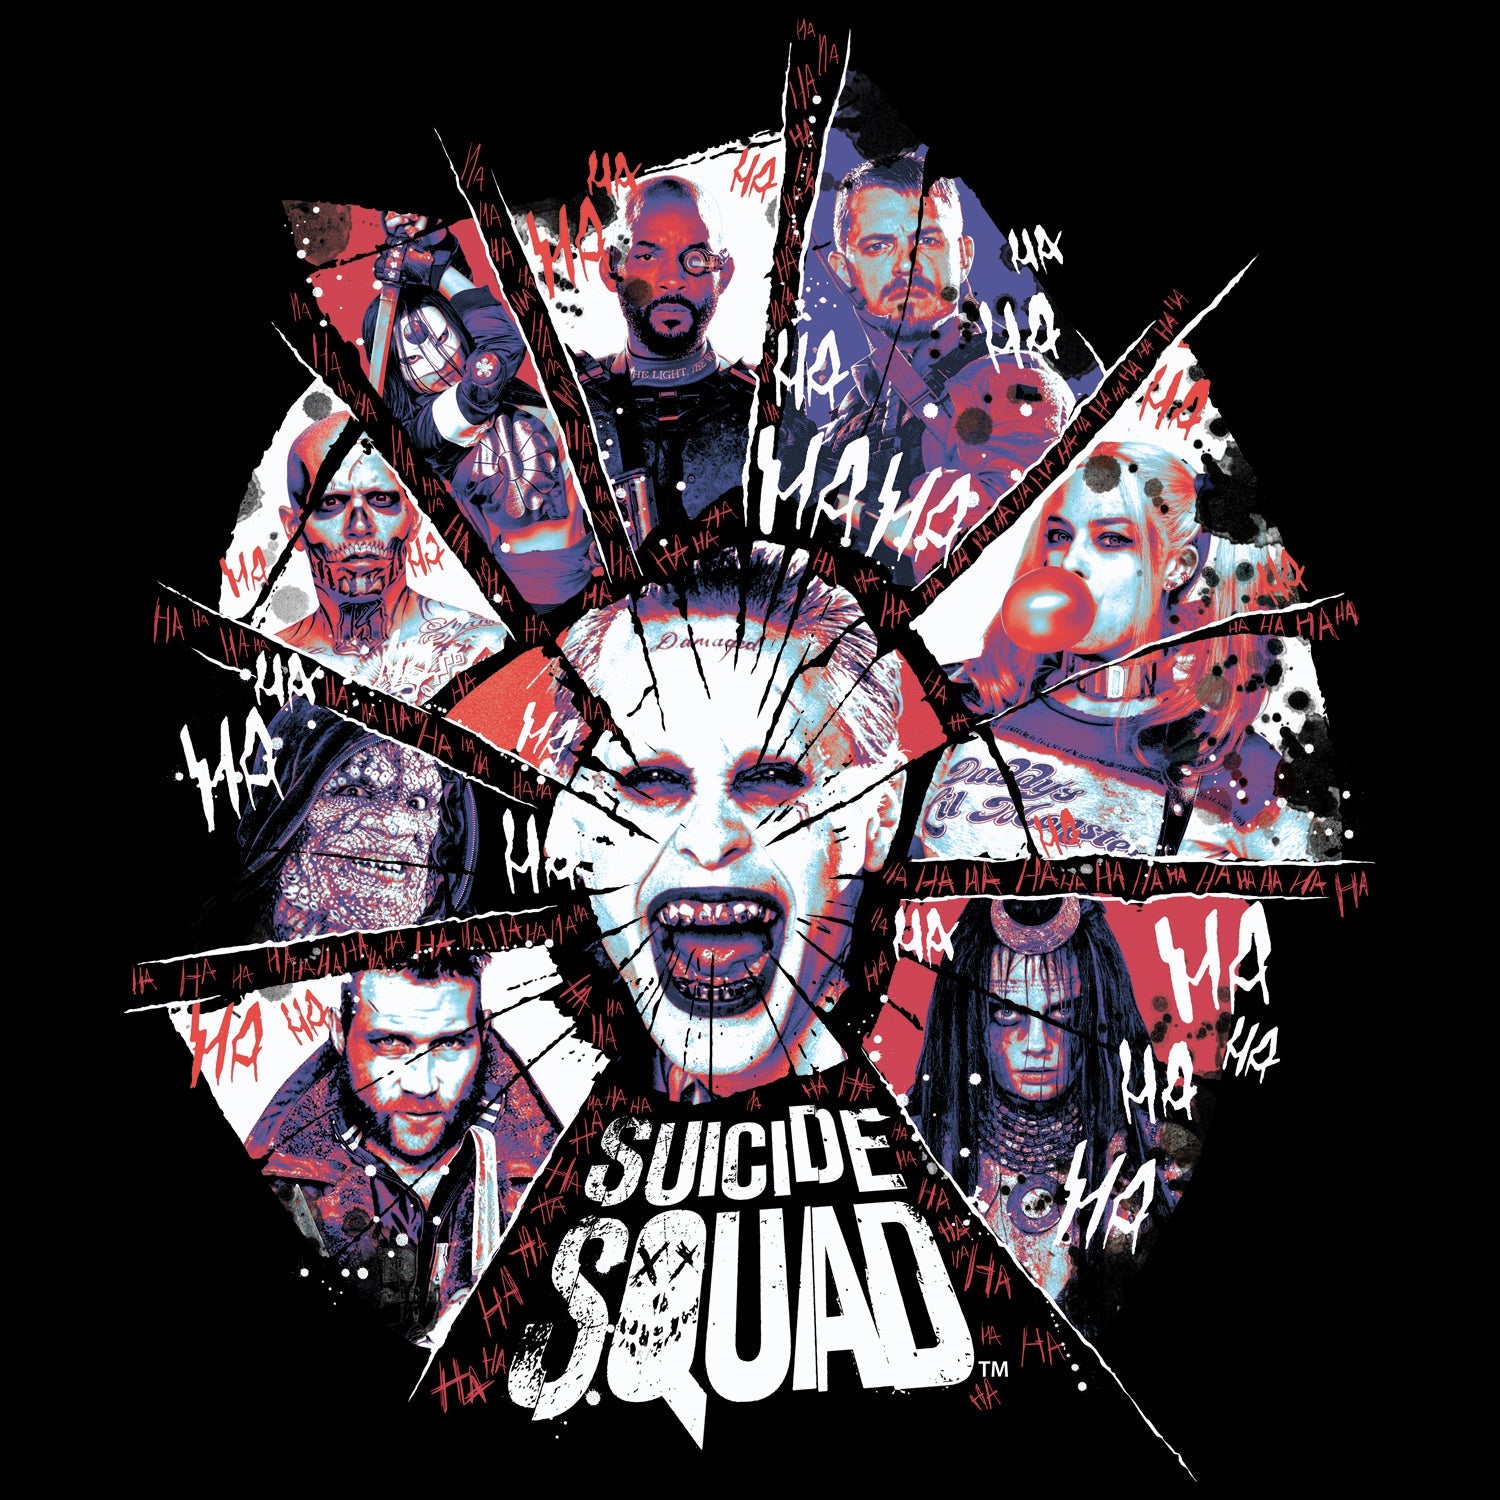 DC Suicide Squad Shattered Official Women's T-shirt ()